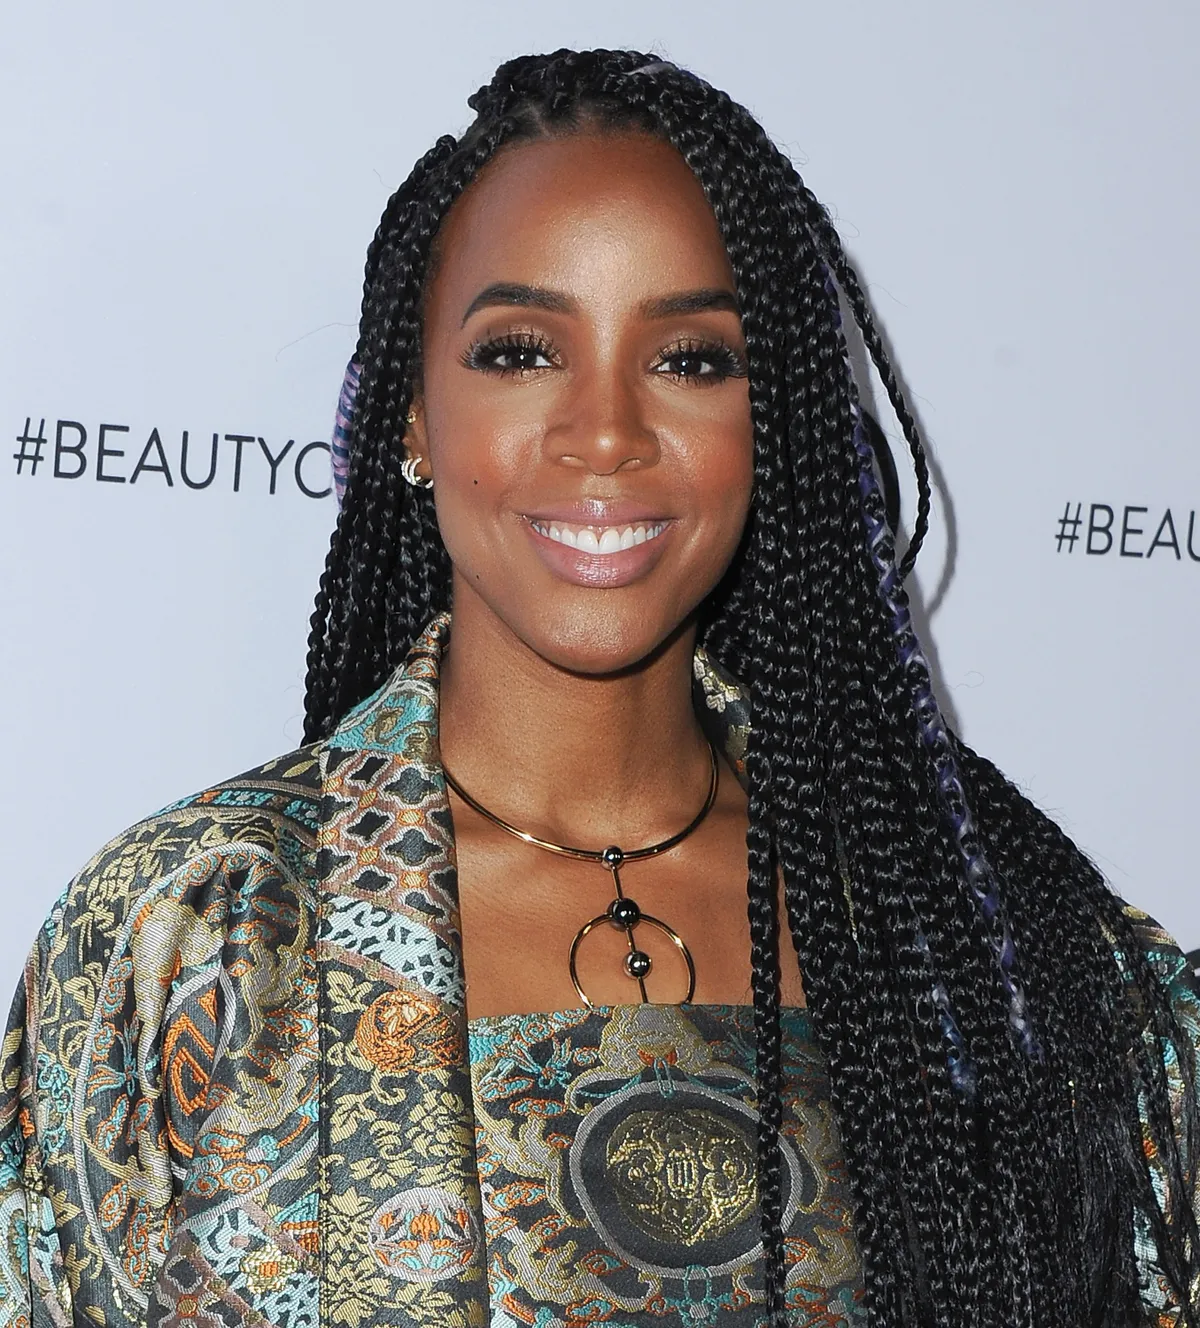 Kelly Rowland at the 5th Annual Beautycon Festival in Los Angeles, California, 2017. | Photo: Getty Images